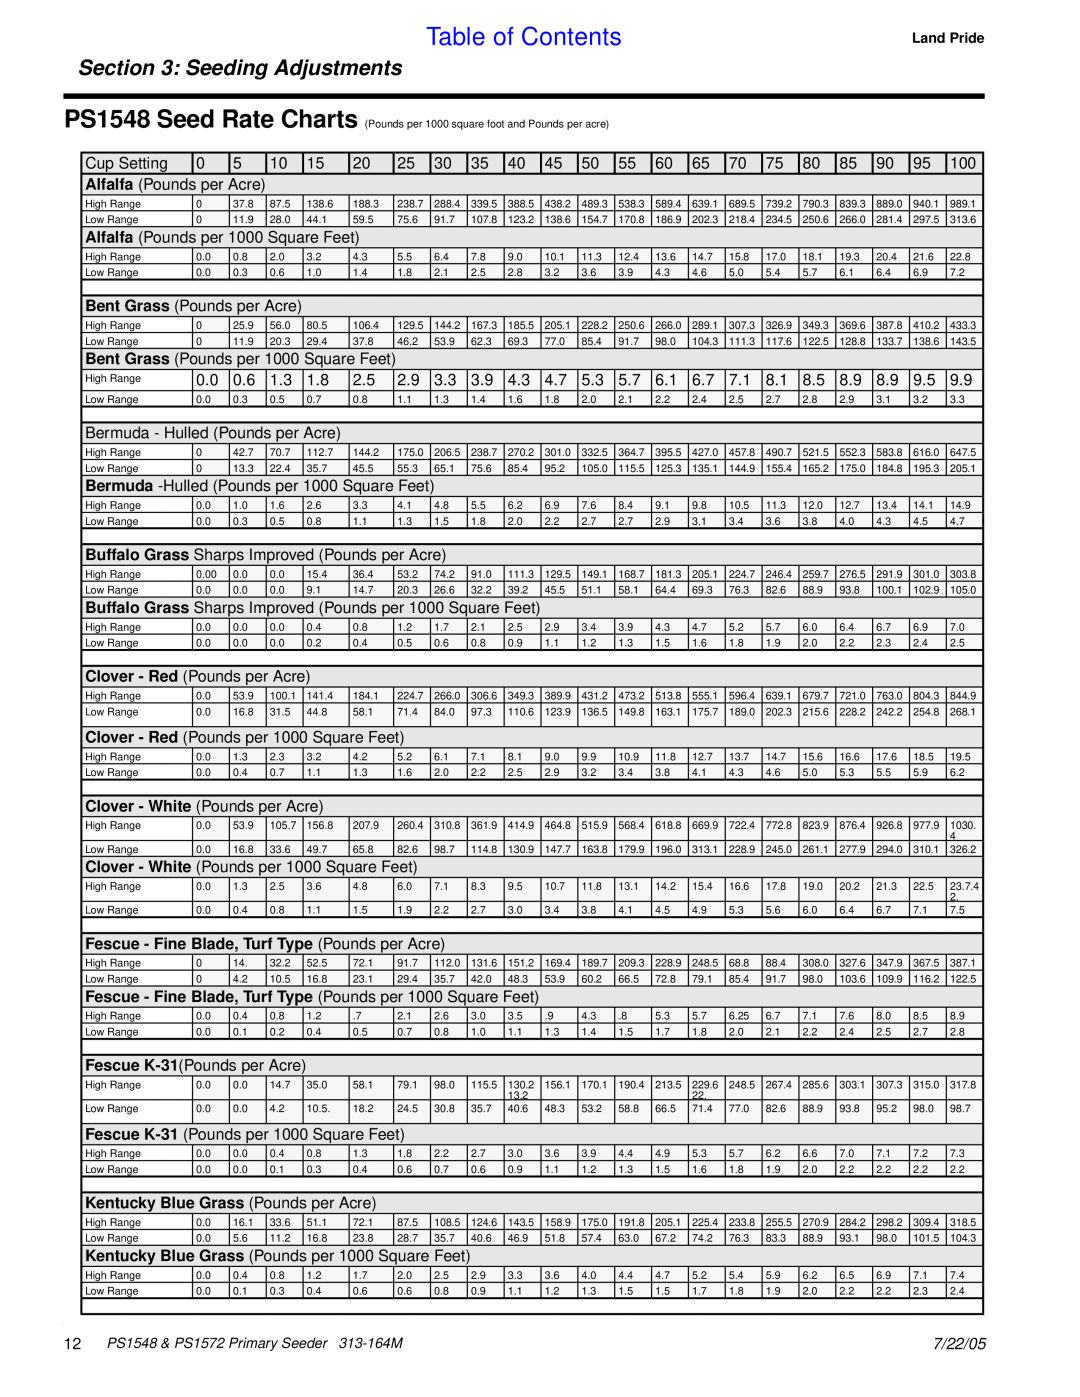 Land Pride PS1548, PS1572 Table of Contents, Seeding Adjustments, Fescue - Fine Blade, Turf Type Pounds per Acre, 7/22/05 